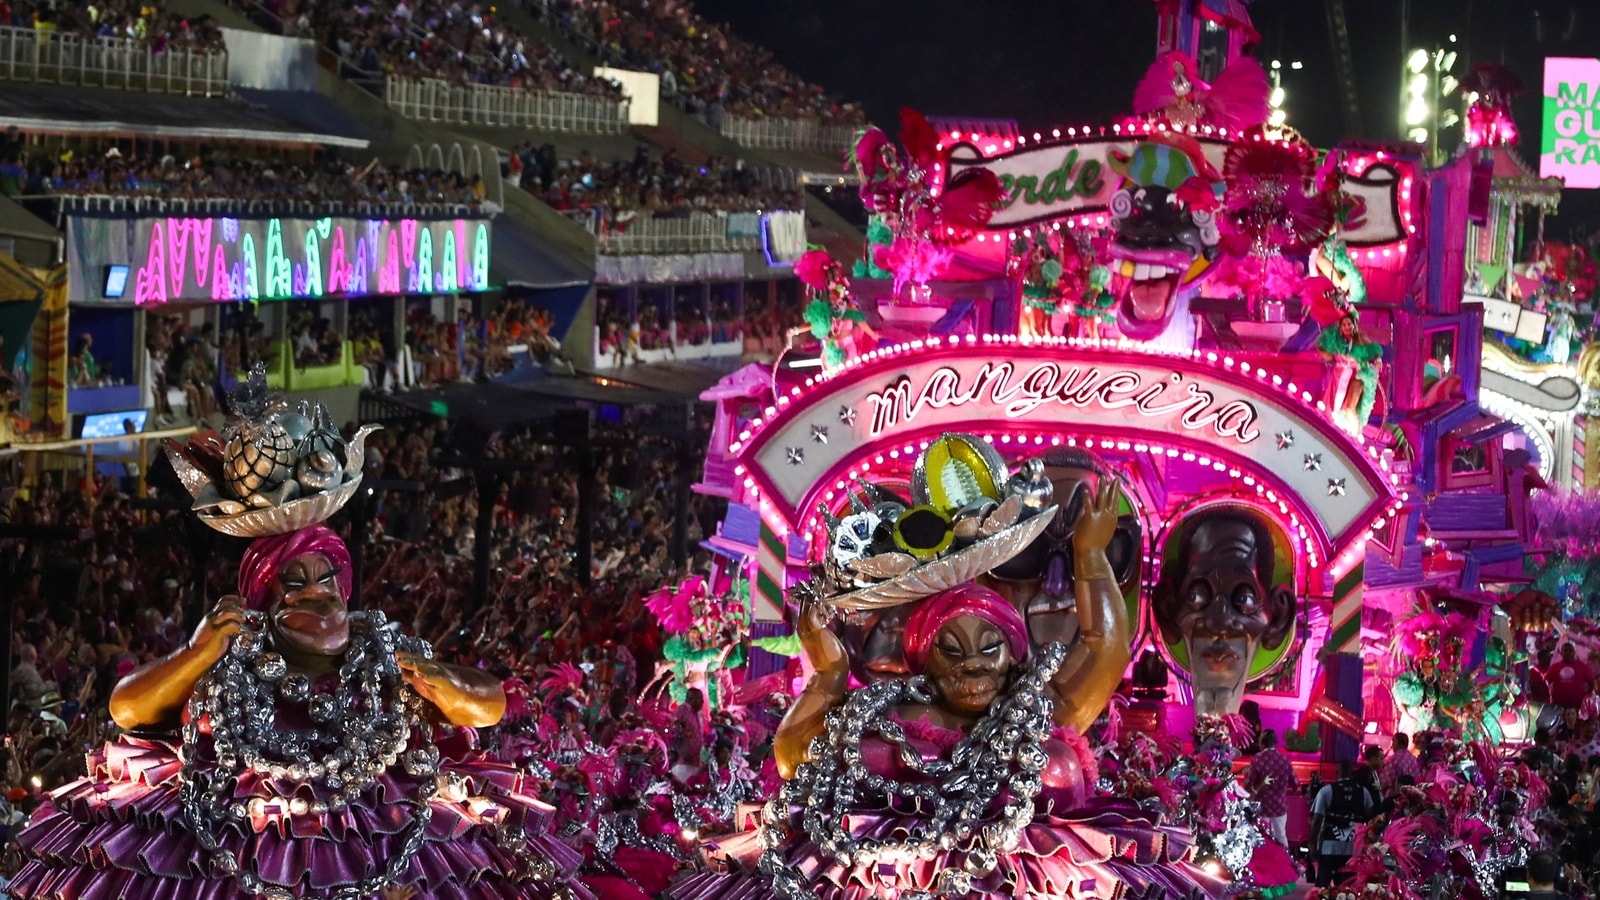 Now we can be happy again: After pandemic hiatus, Carnival parades resume  in Brazil